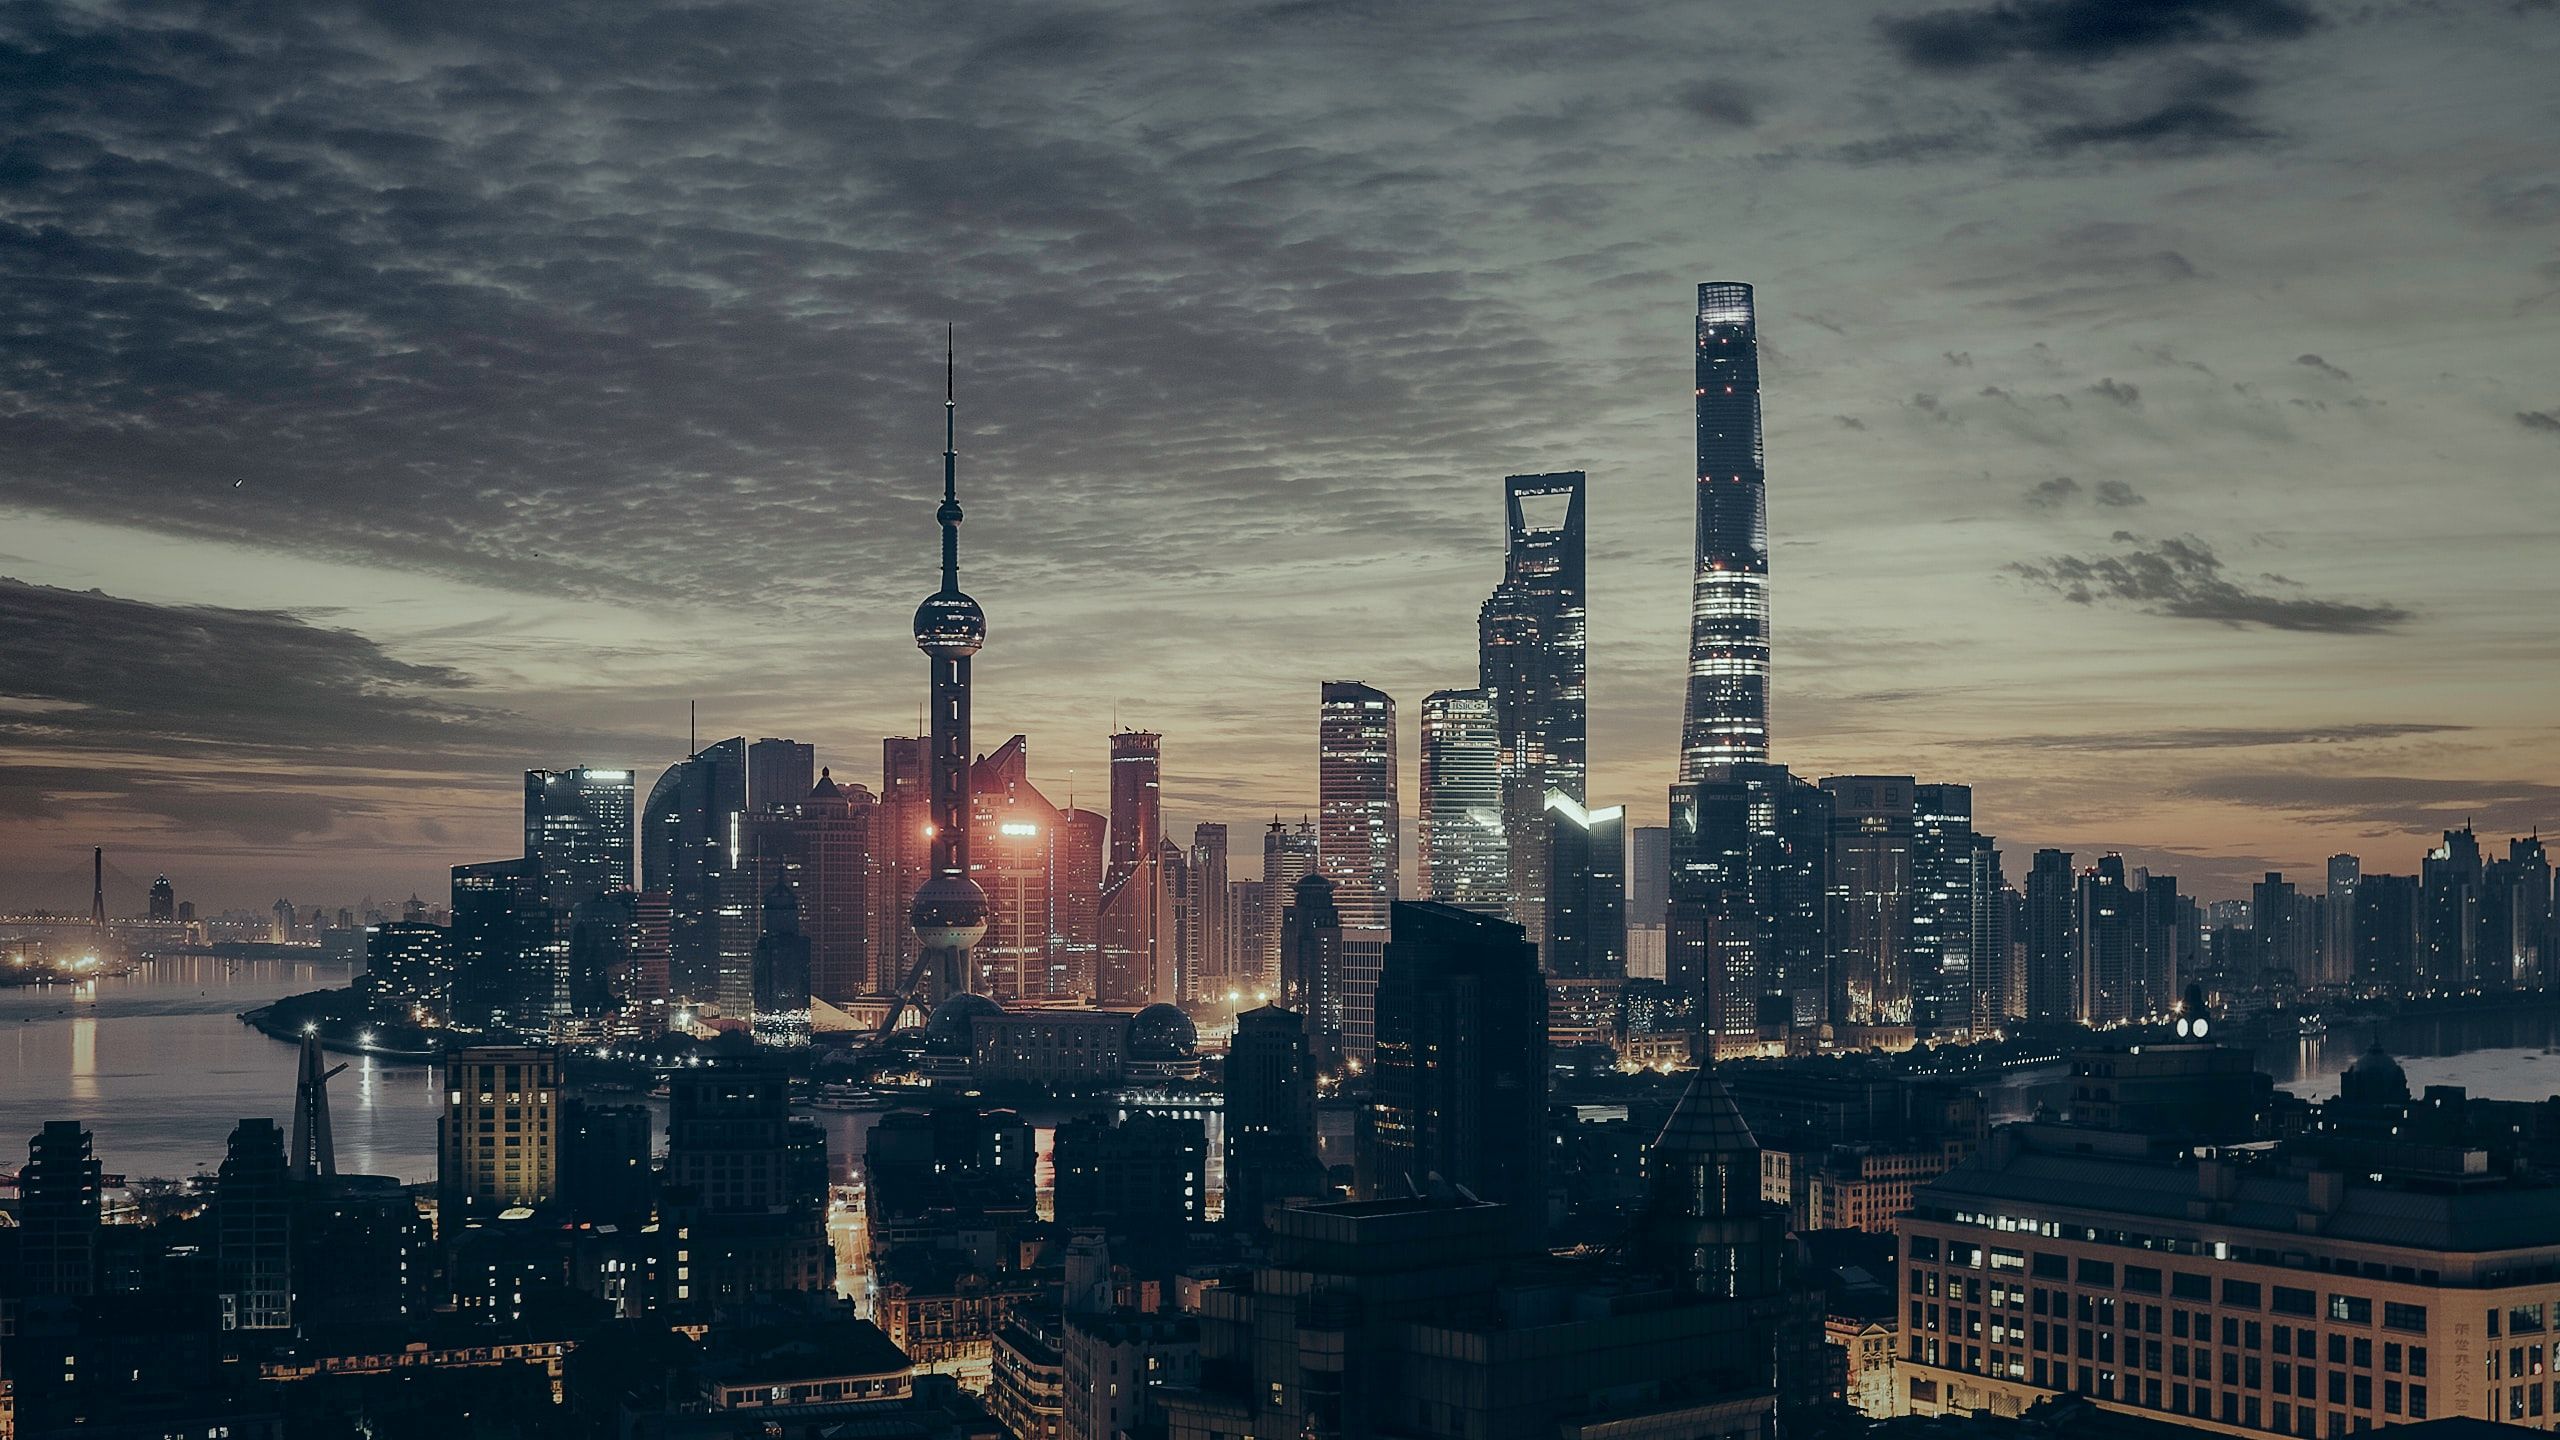 Shanghai tower in night time photo